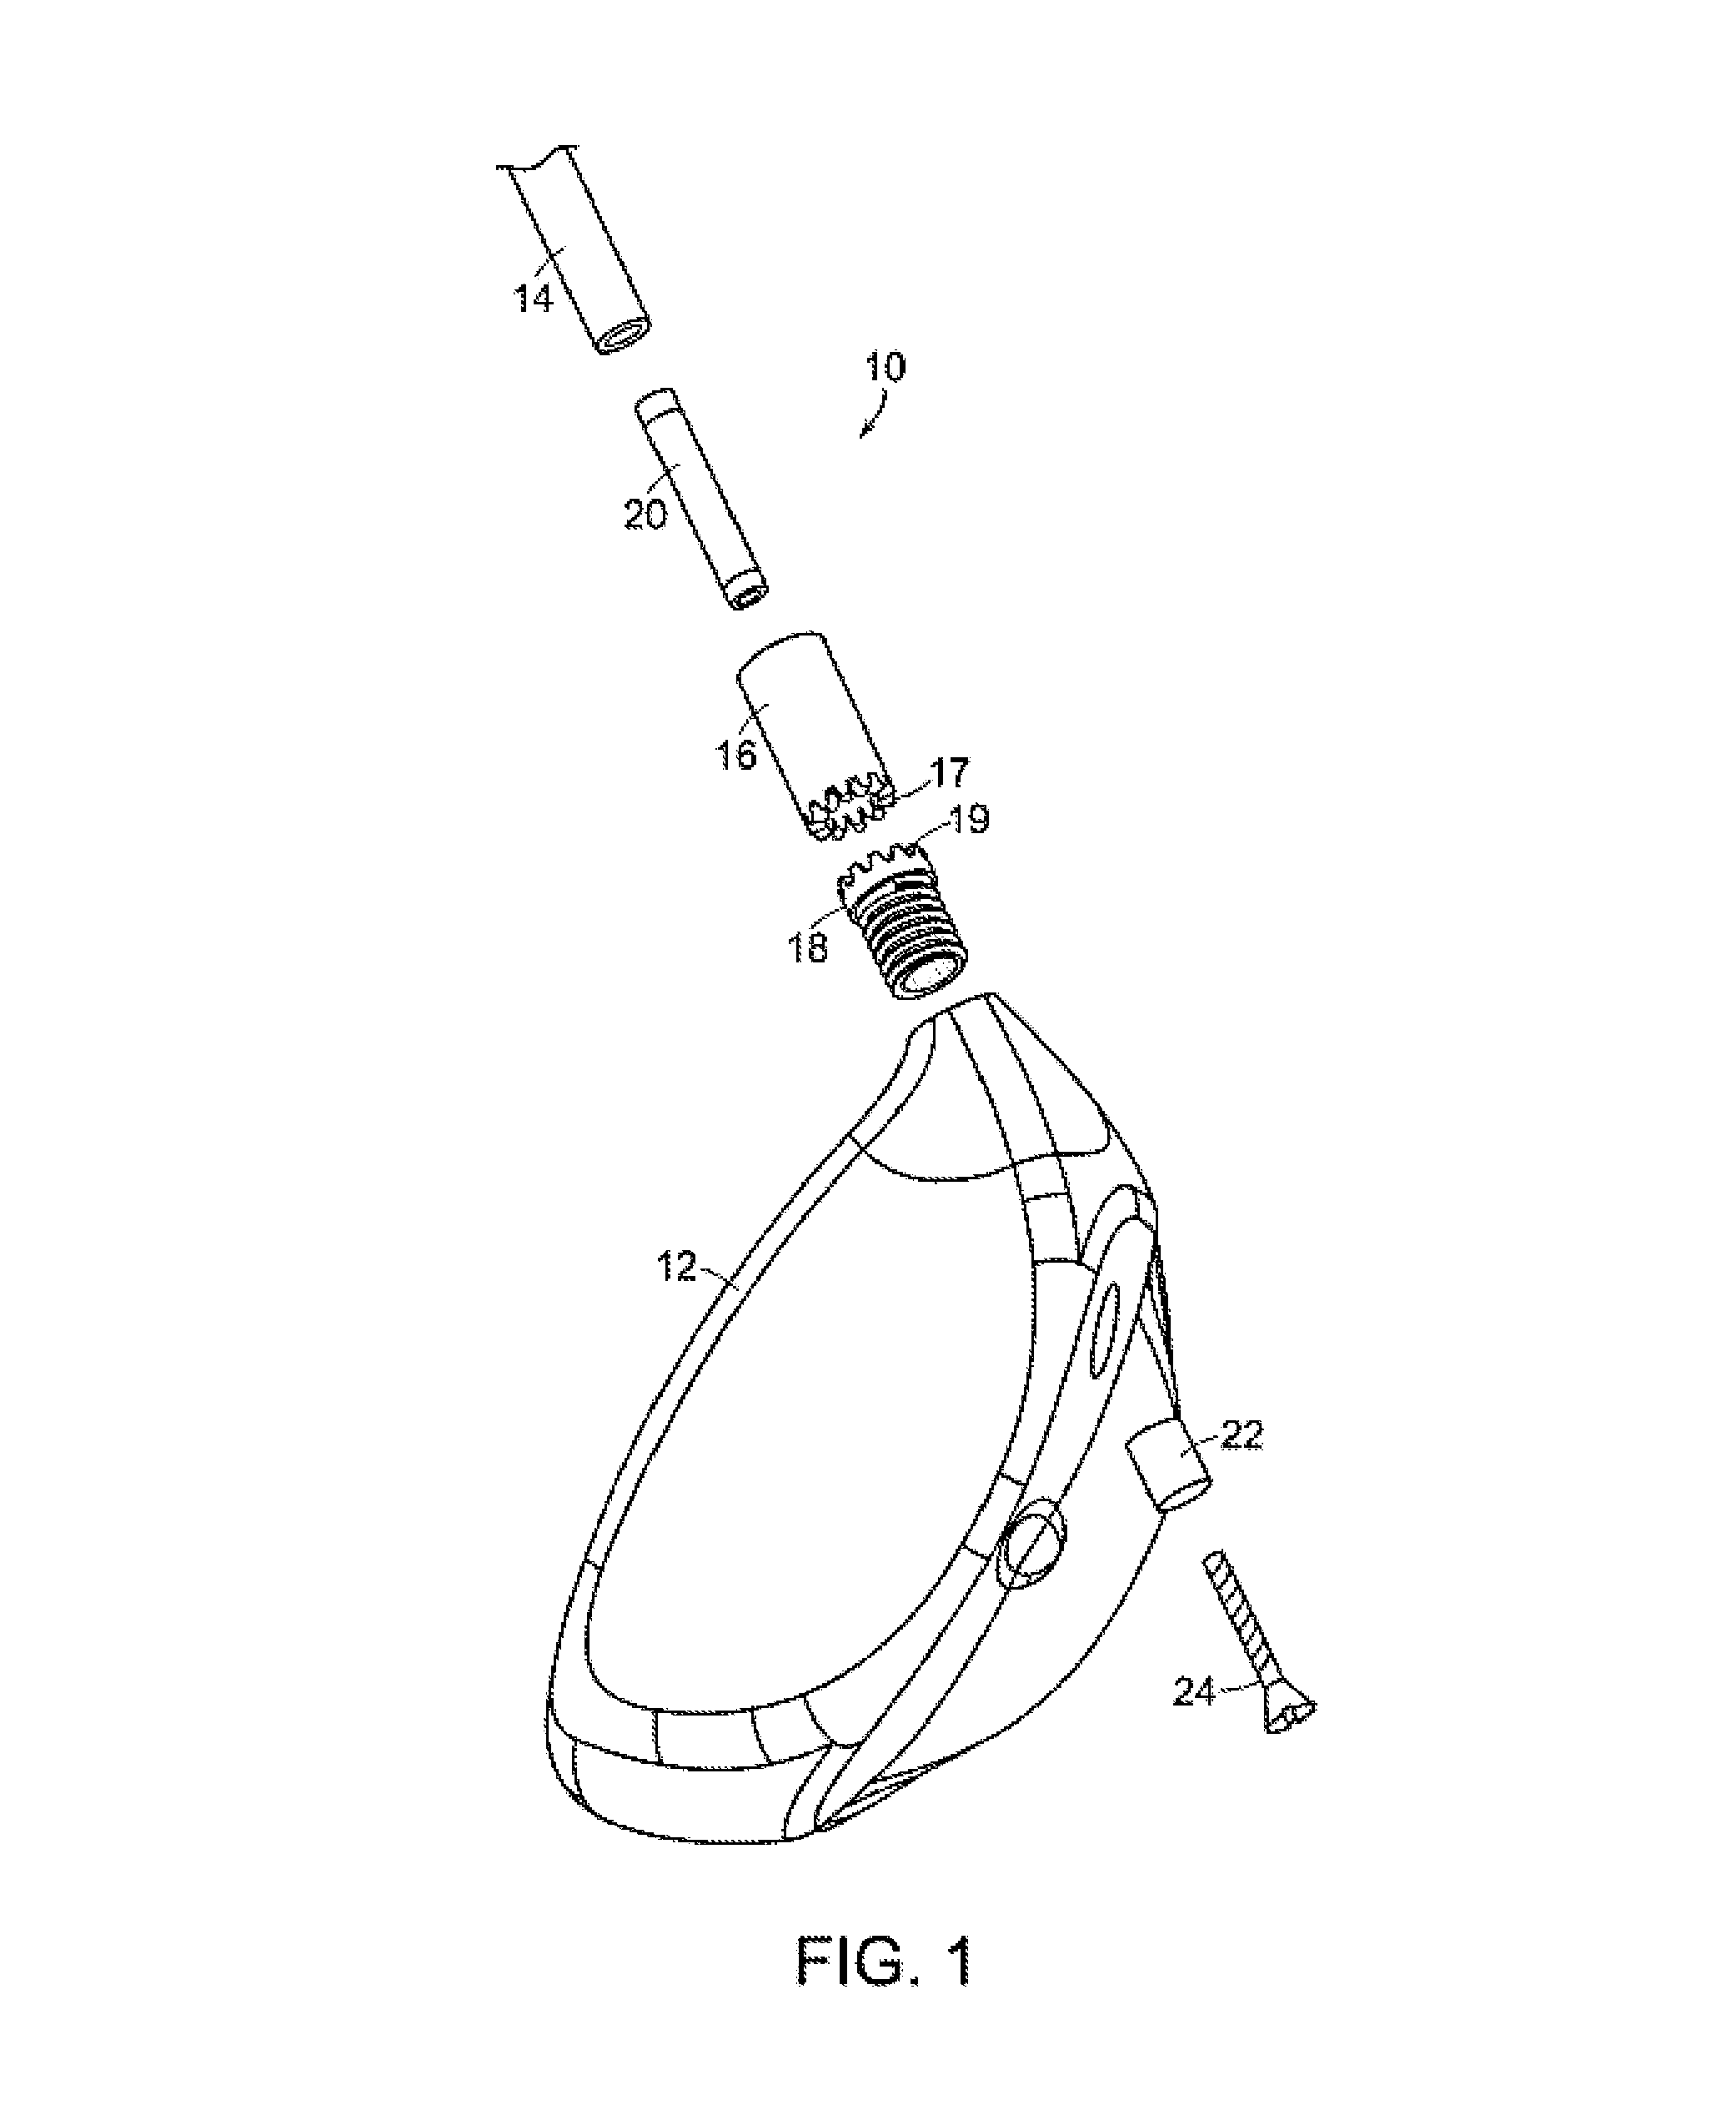 Interchangeable shaft and club head connection system